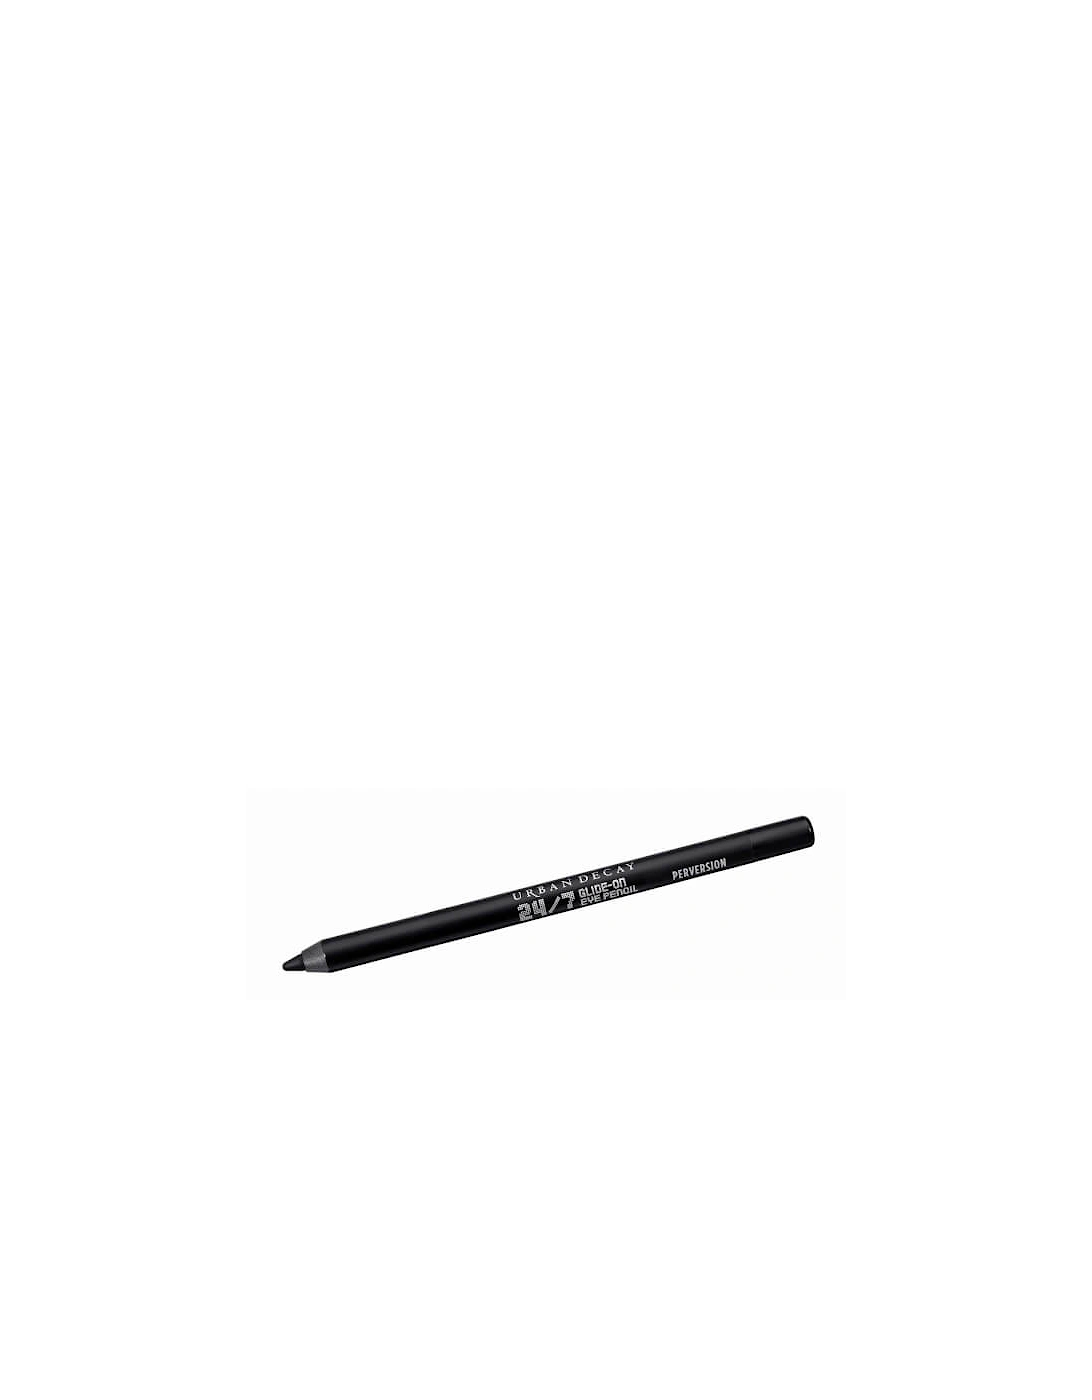 24/7 Glide On Eye Pencil - Whiskey, 43 of 42